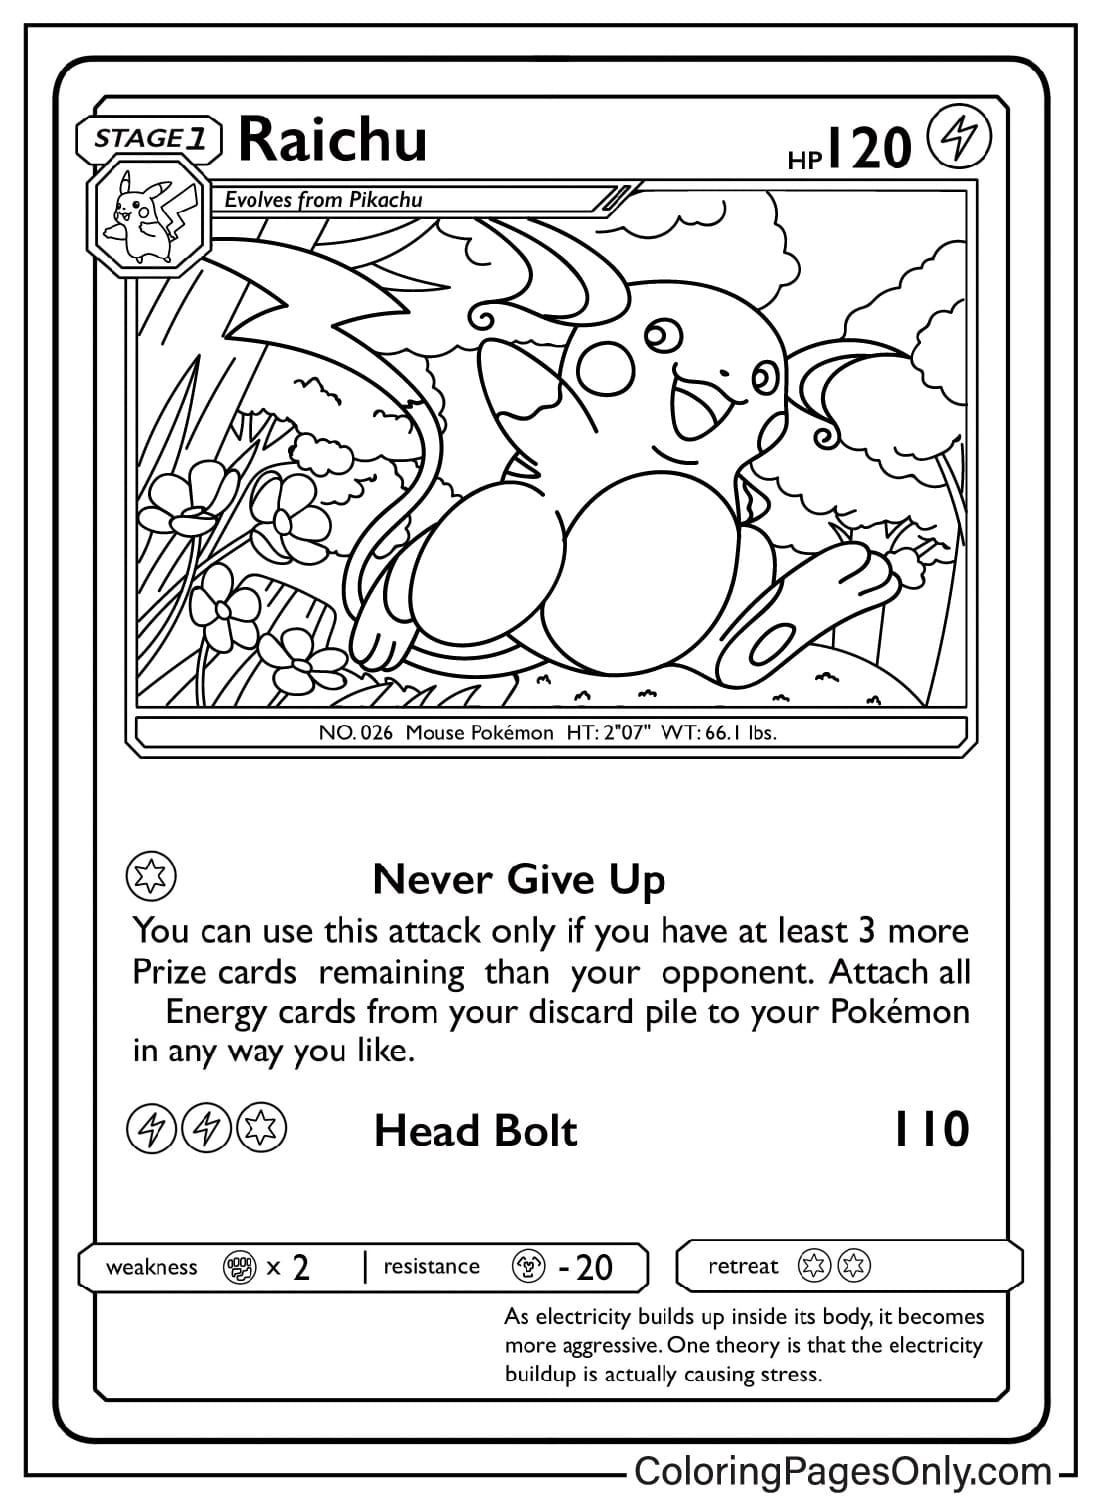 Raichu Card Coloring Page from Pokemon Card